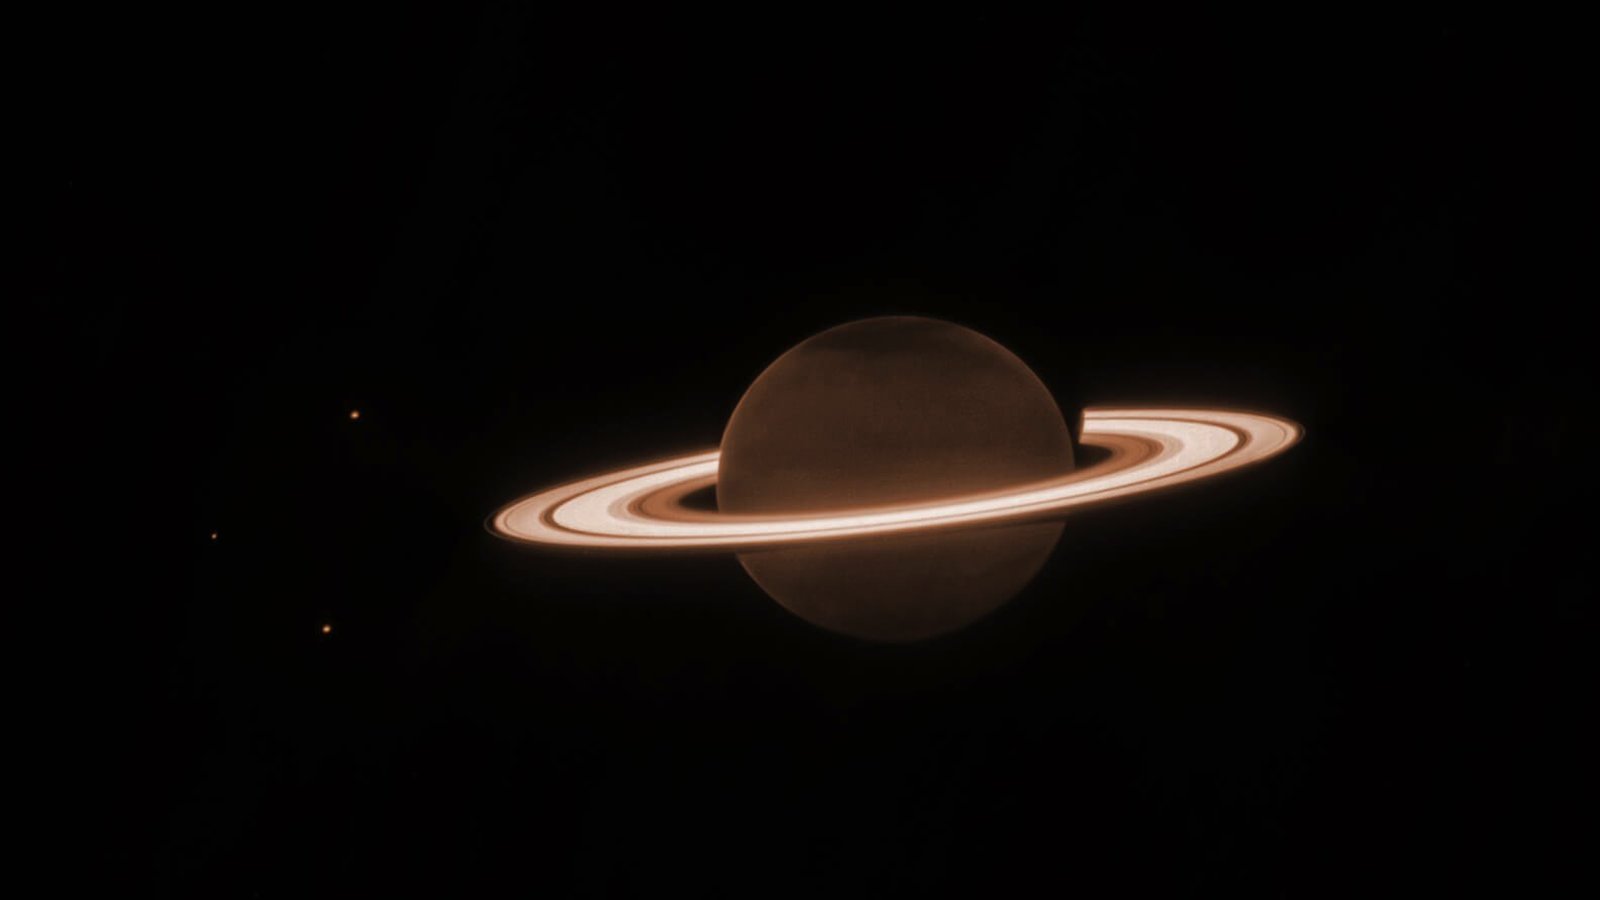 The ringed orb of Saturn appears bather in a brown/orange glow